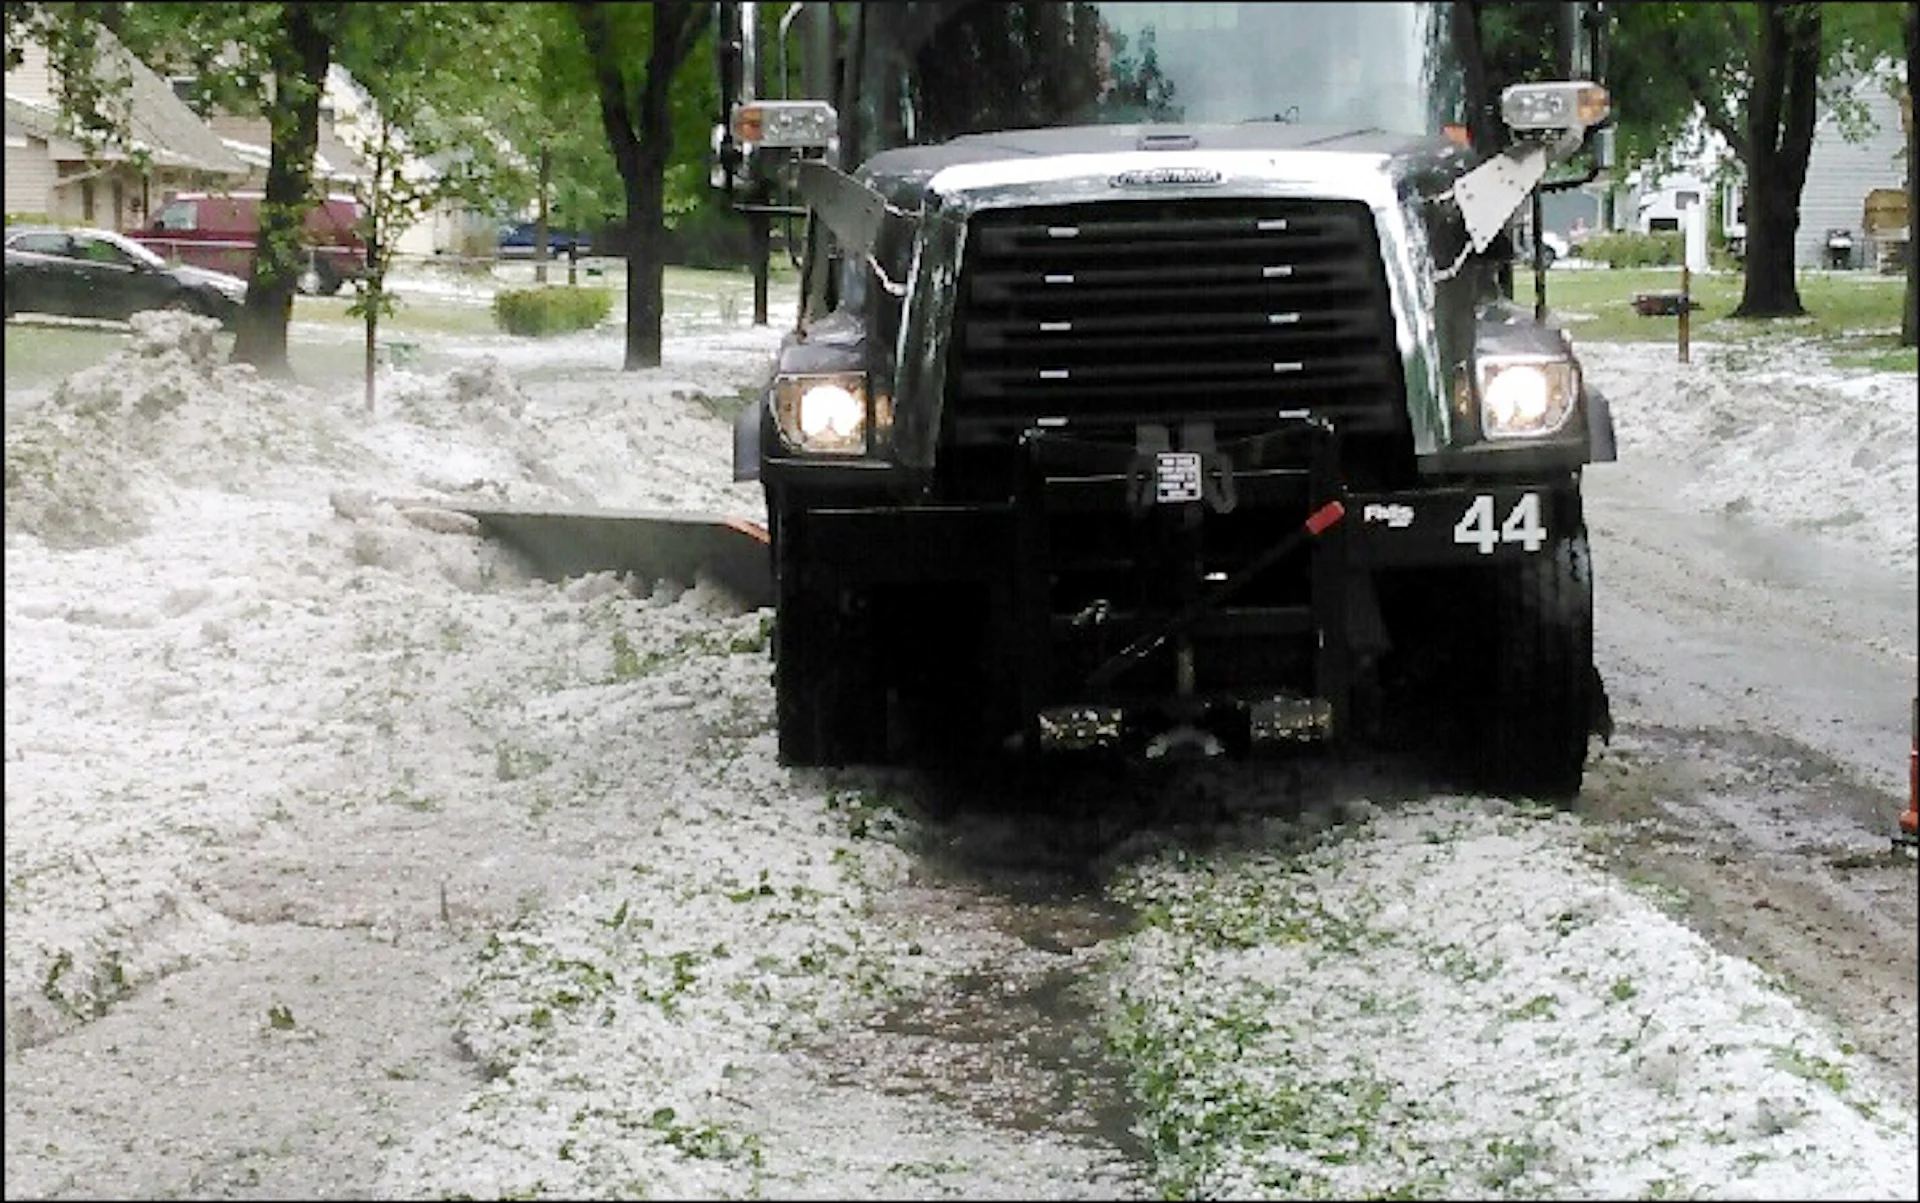 2017 U.S. Midwest hailstorm caused $2.5 billion in damages in Minnesota